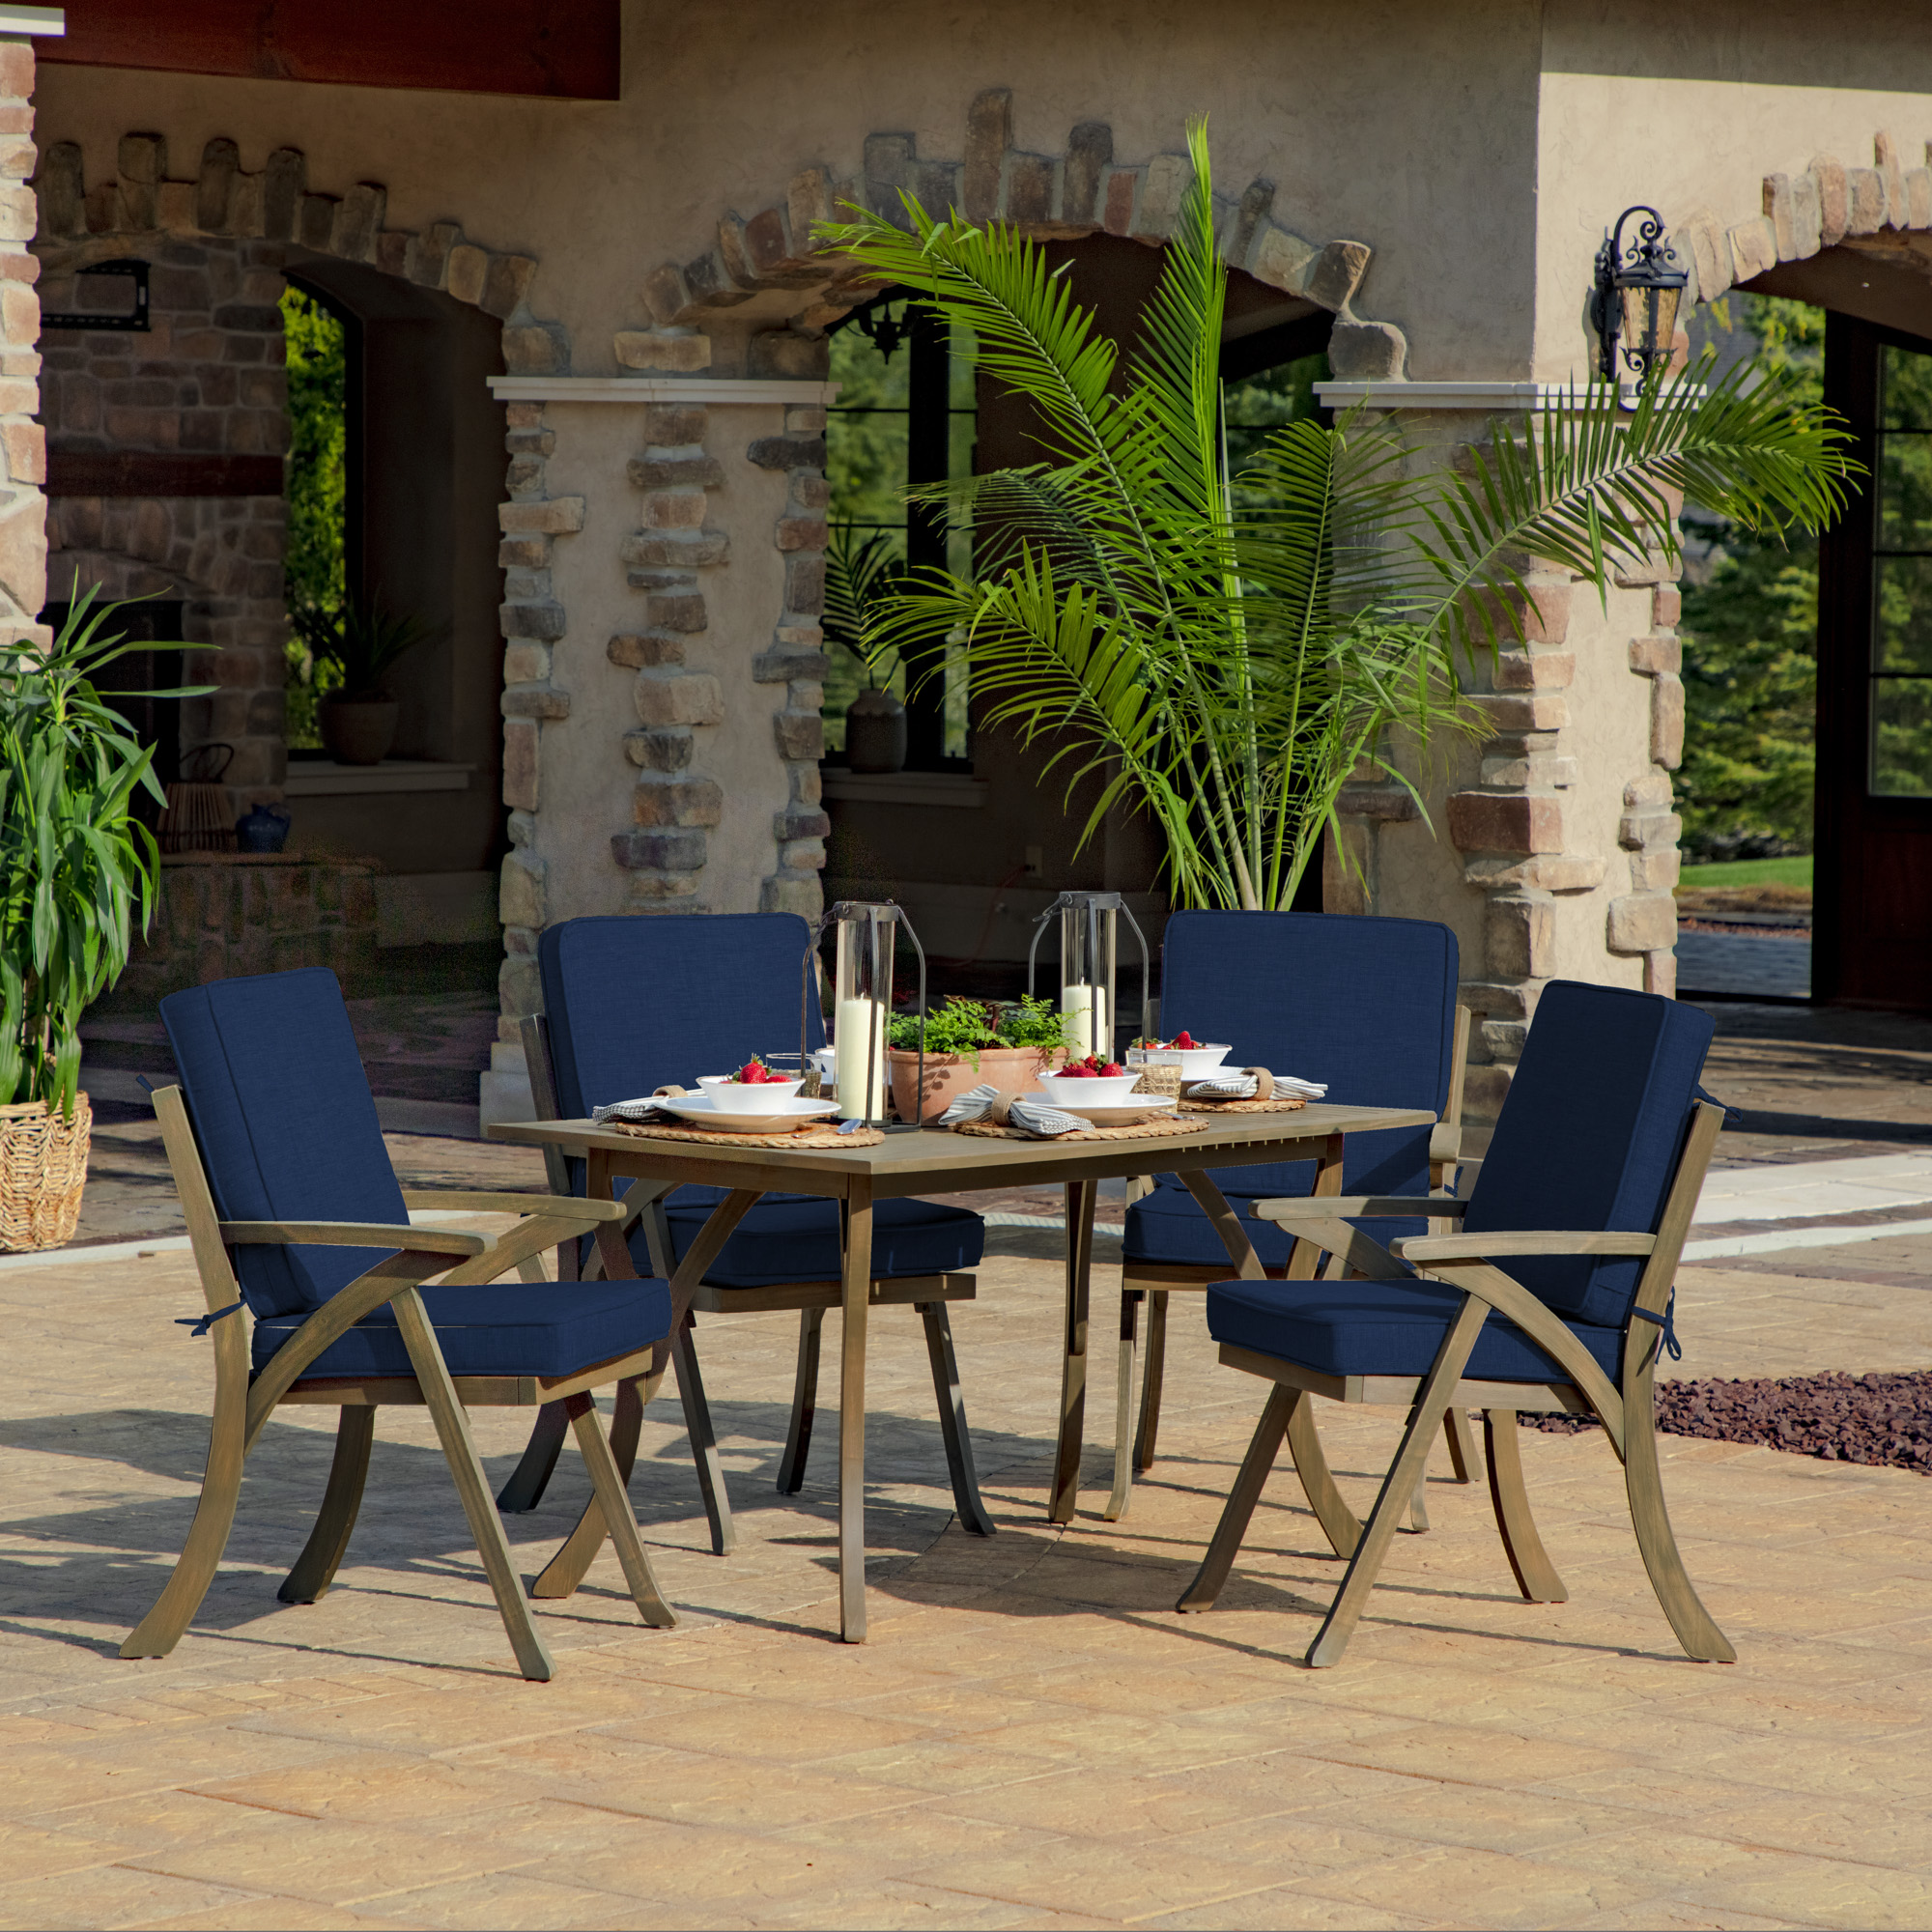 blue outdoor dining chairs around table